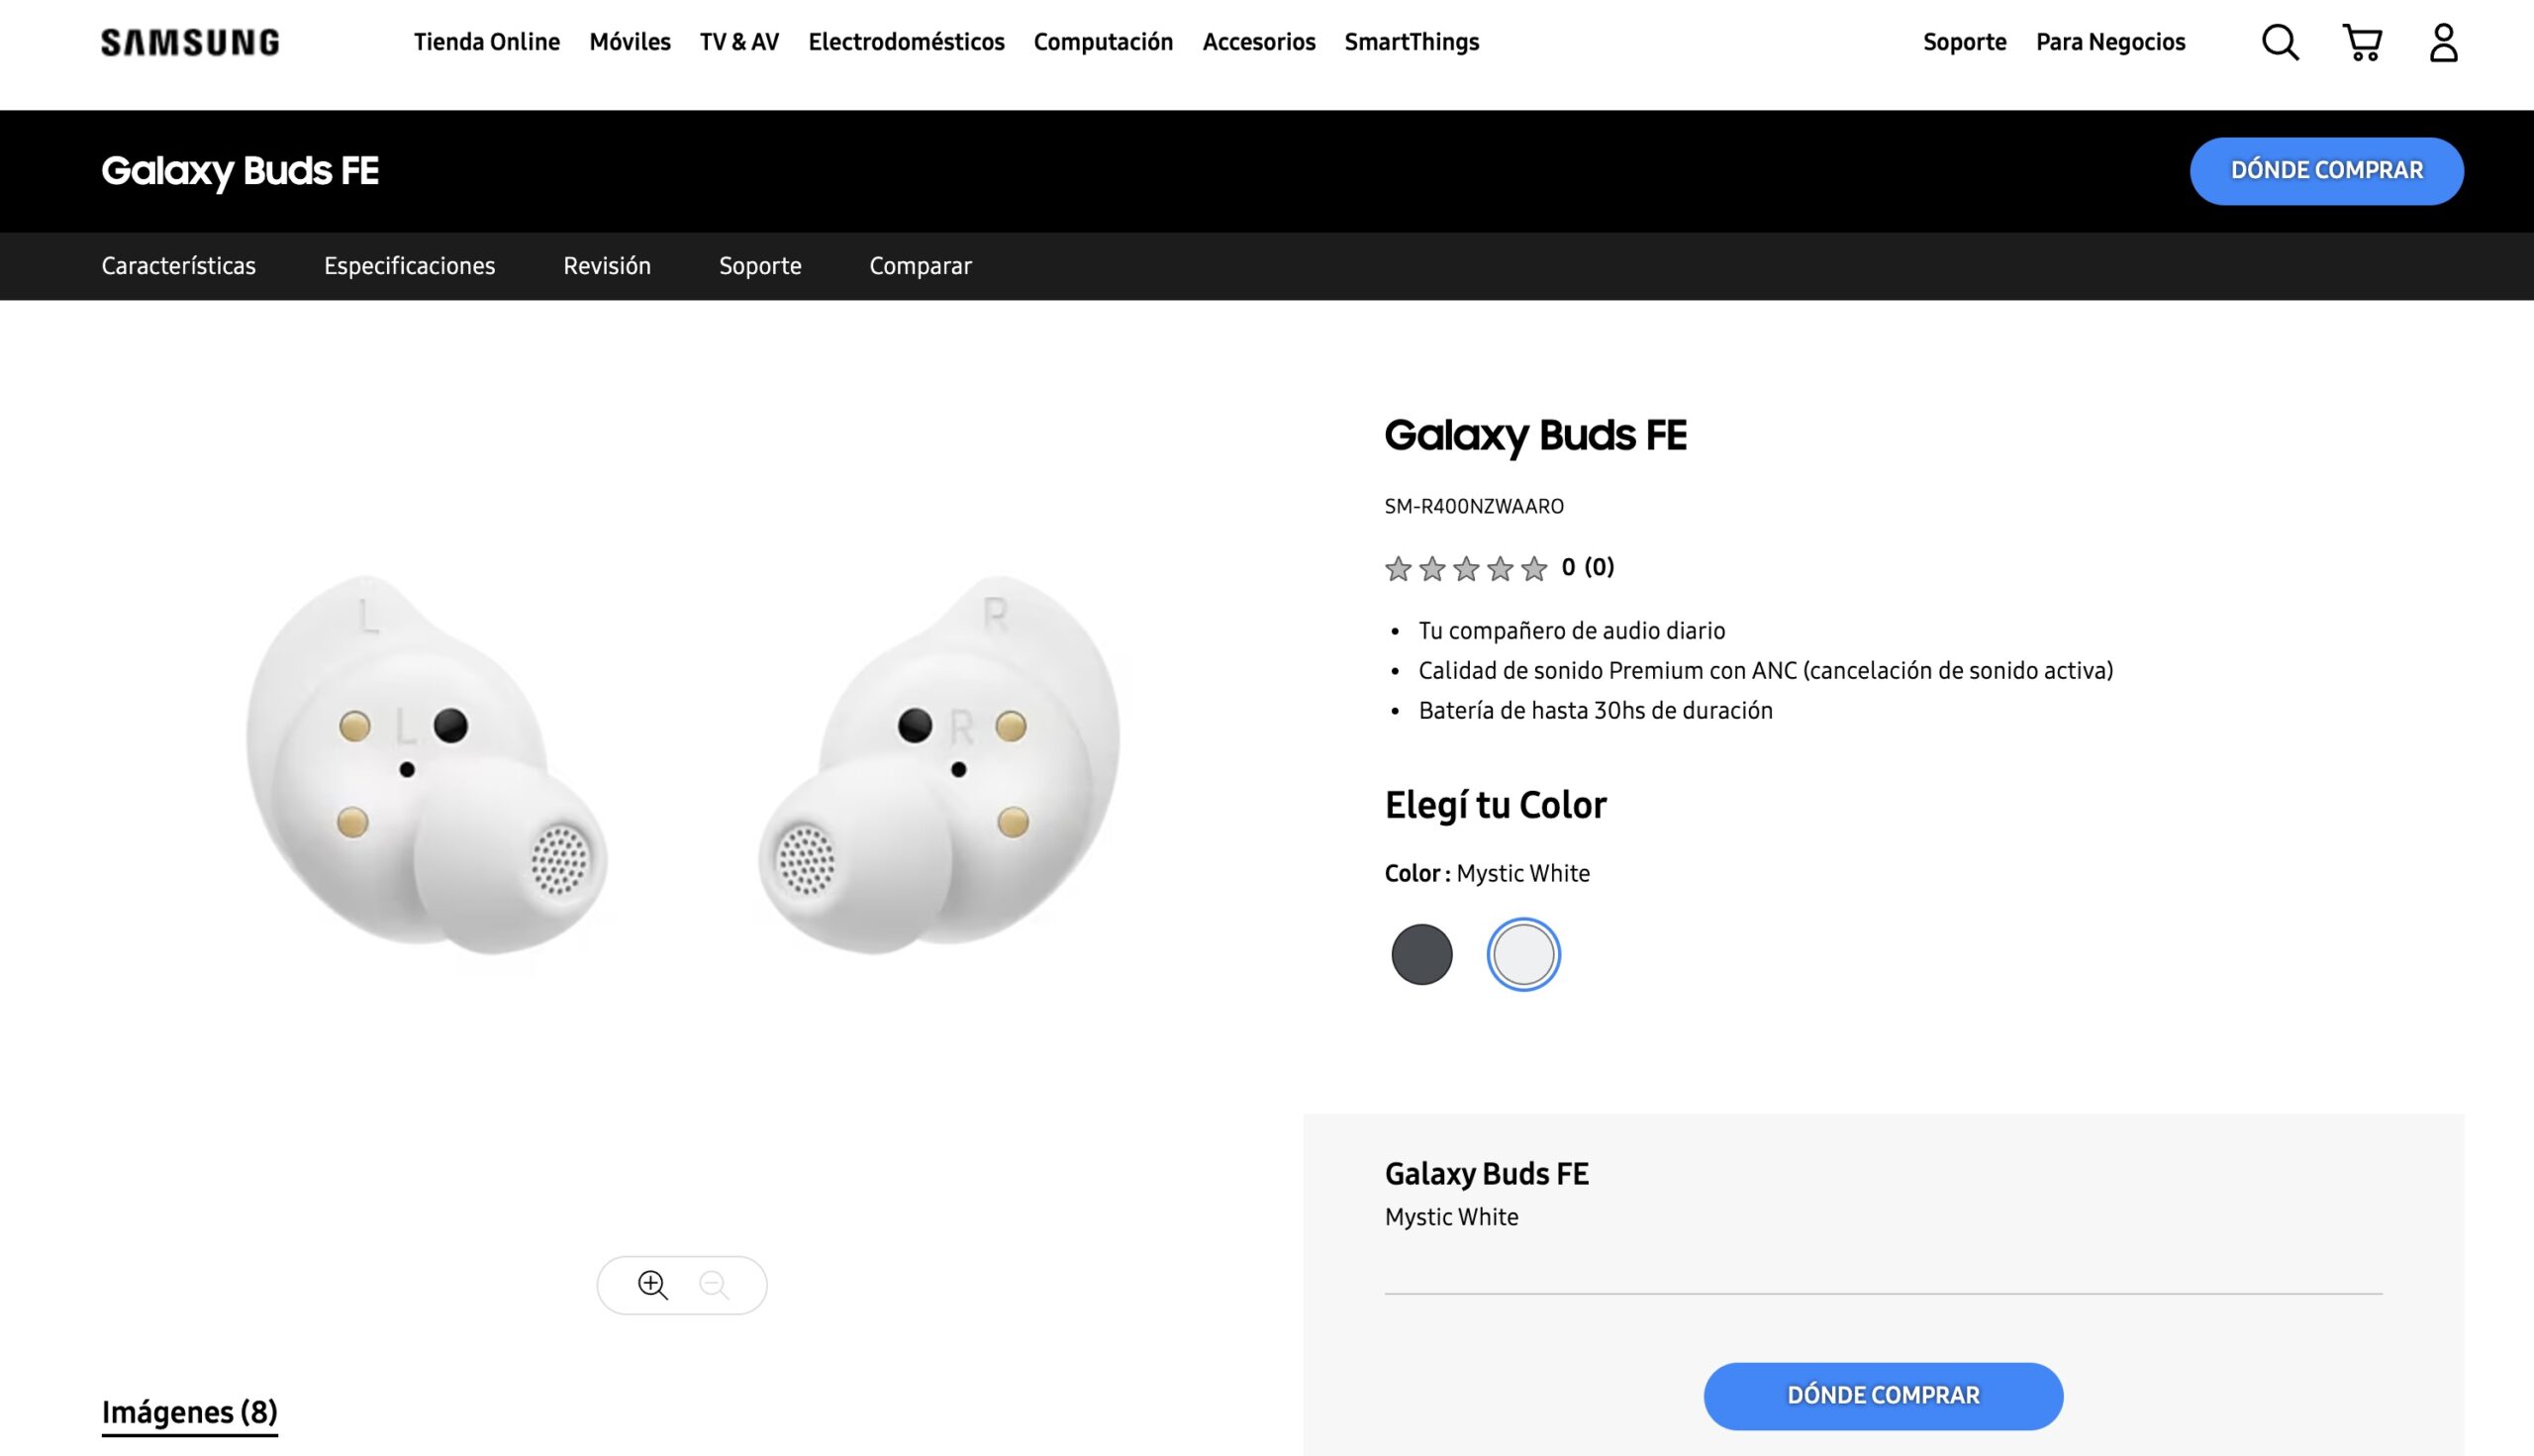 Samsung leaks its own Galaxy Buds FE before launch, revealing specs -  SamMobile